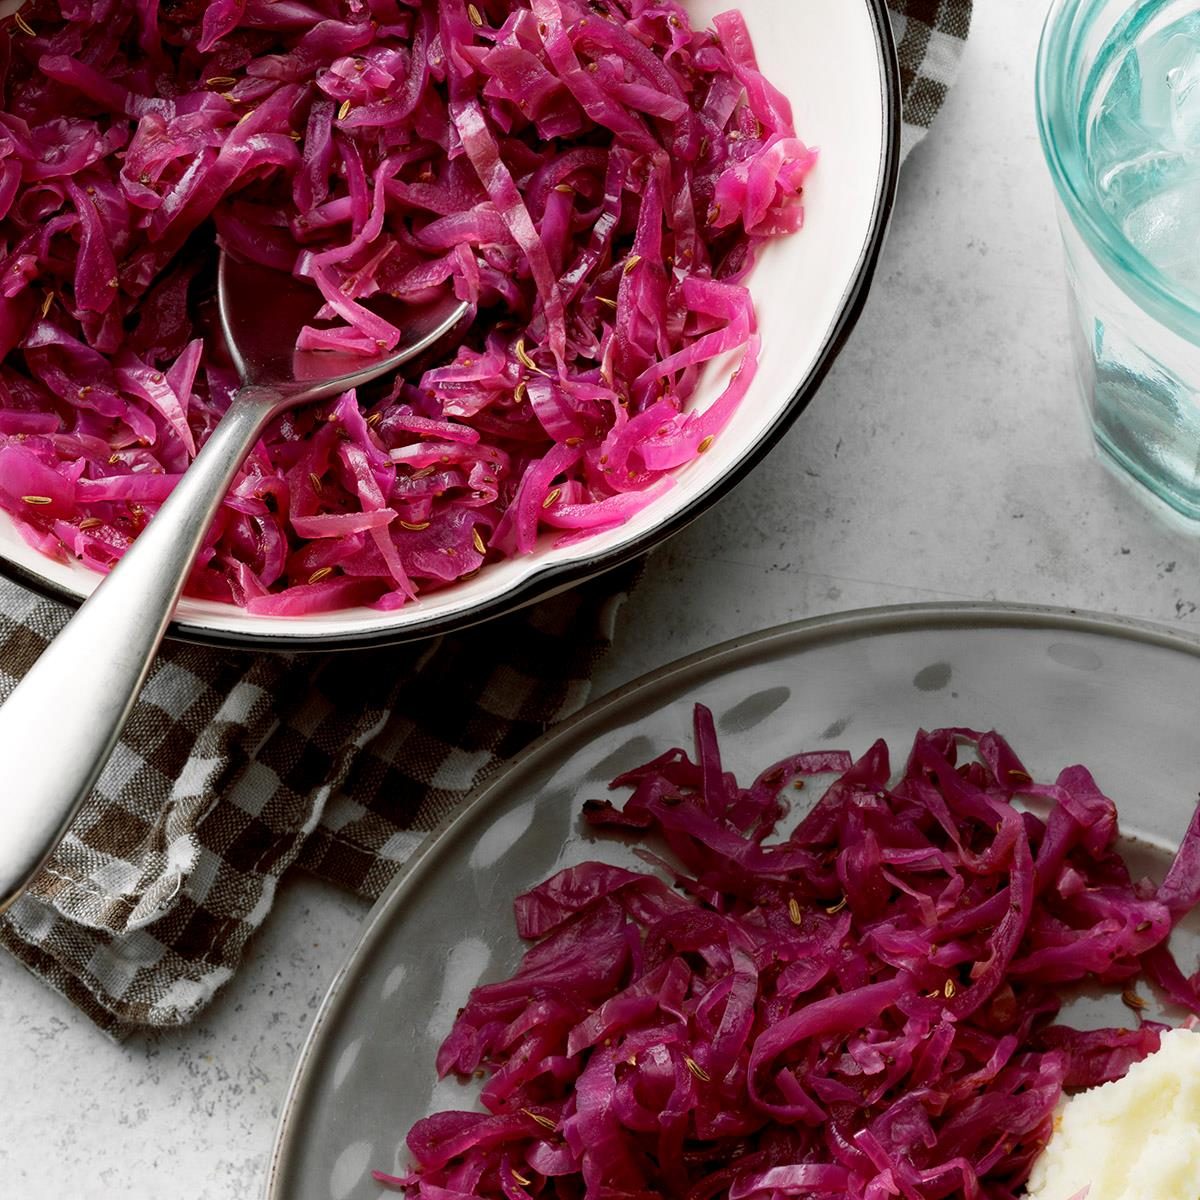 Sweet-Sour Red Cabbage